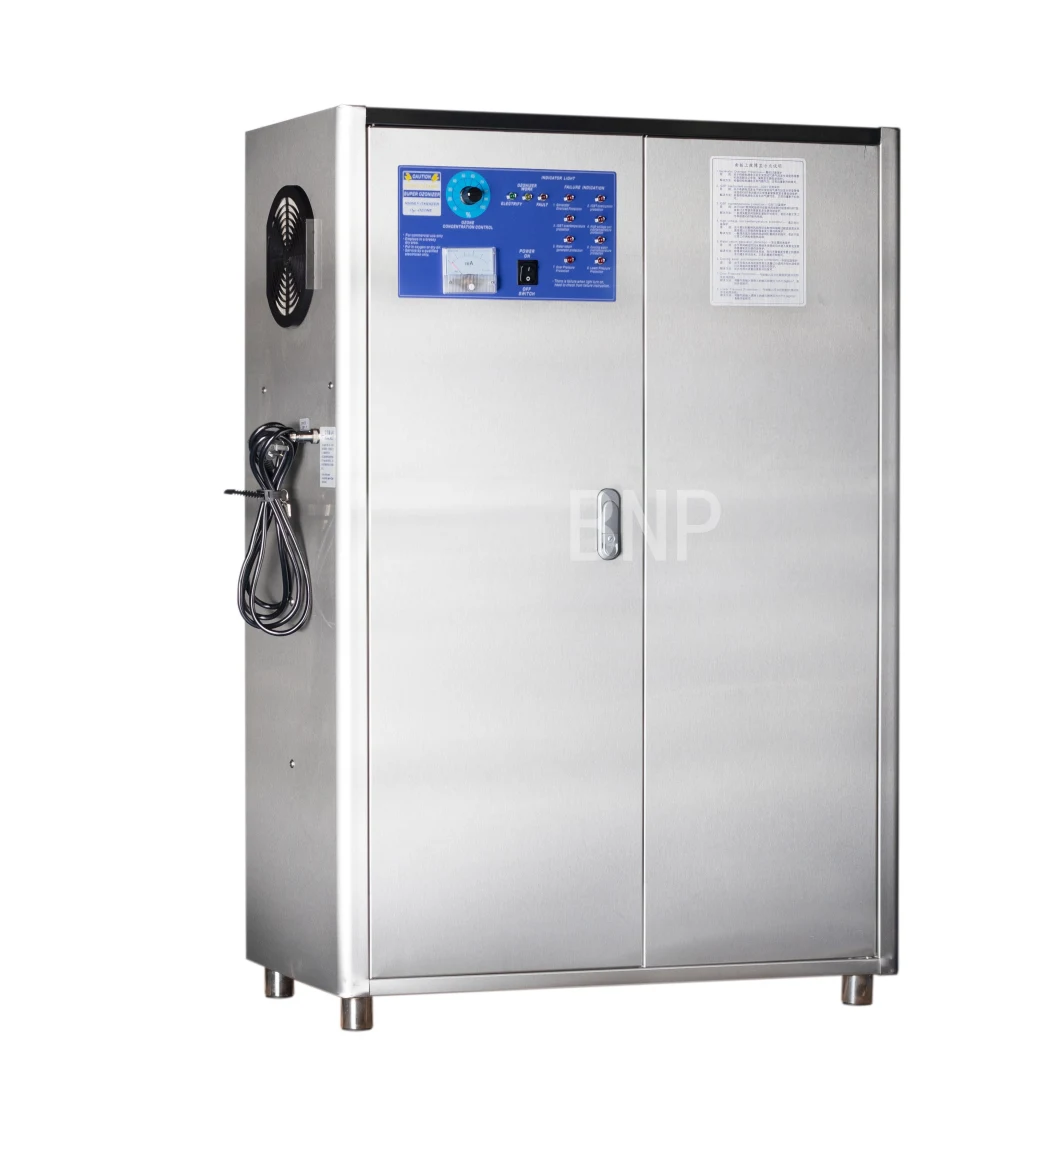 Bnp Manufacturer Yw-50g Industrial Ozone Generator for Air Pool Water Treatment